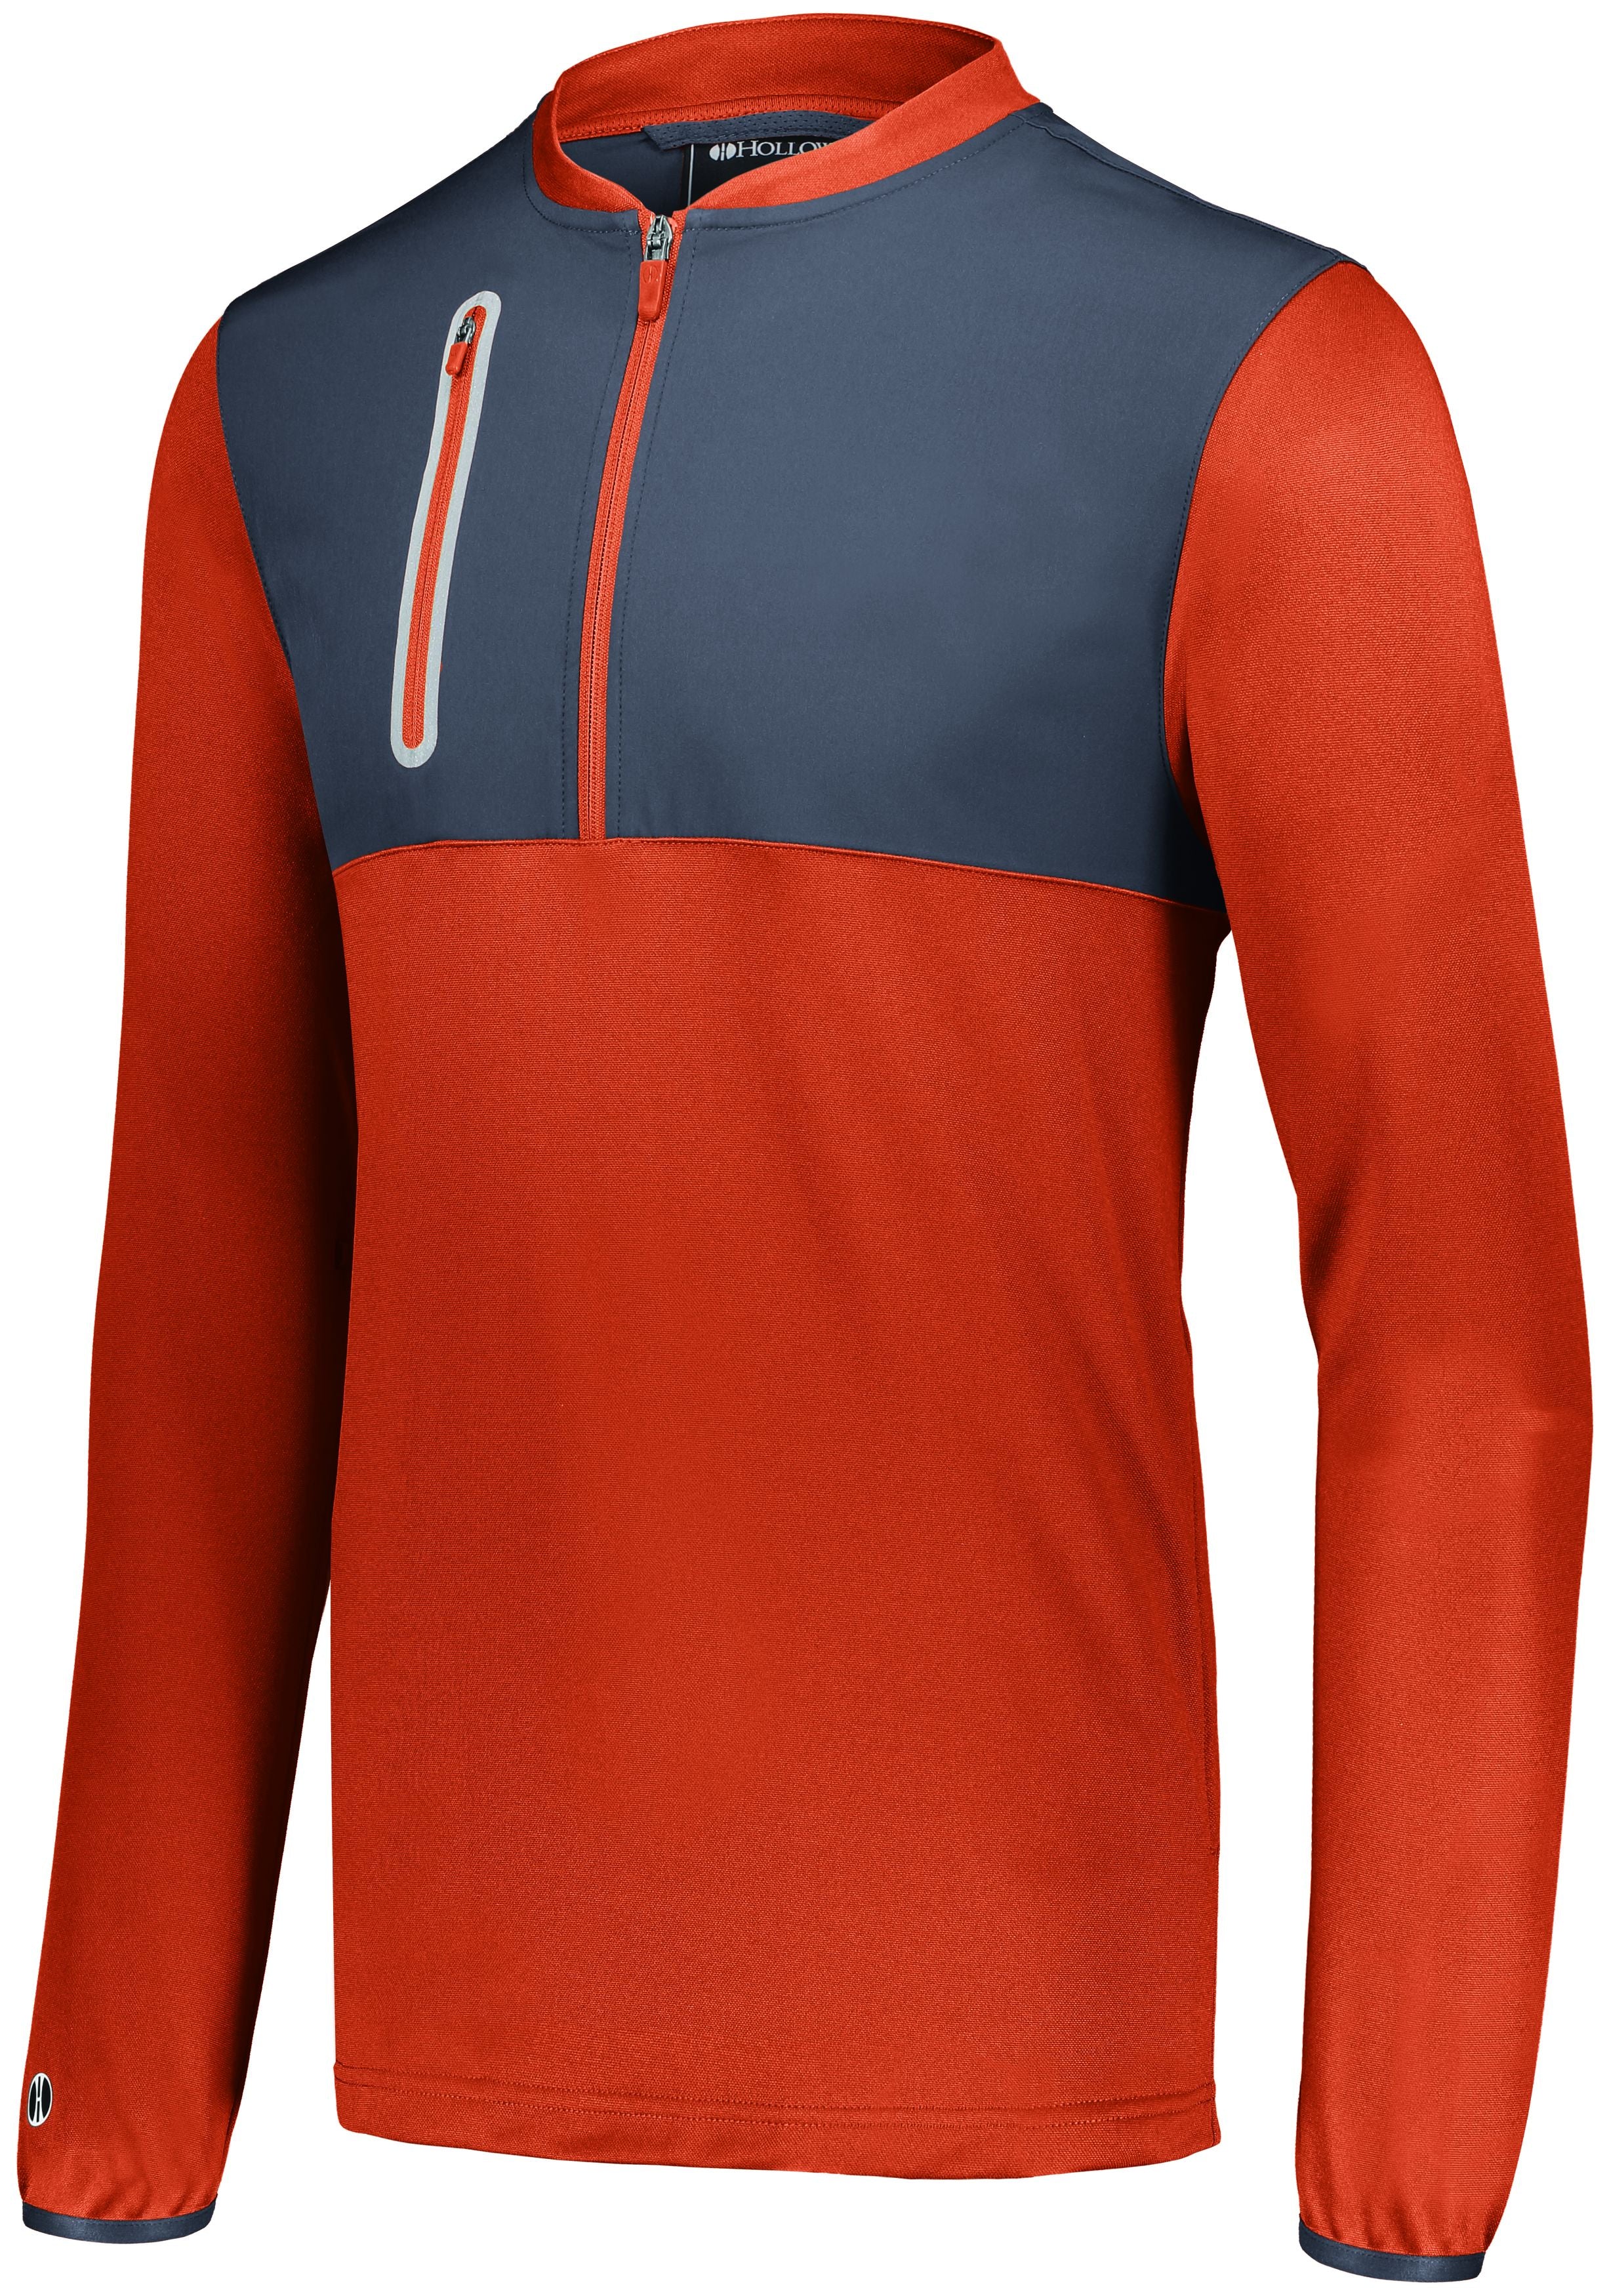 Holloway Weld Hybrid Pullover in Orange/Carbon  -Part of the Adult, Adult-Pullover, Holloway, Outerwear, Weld-Collection product lines at KanaleyCreations.com